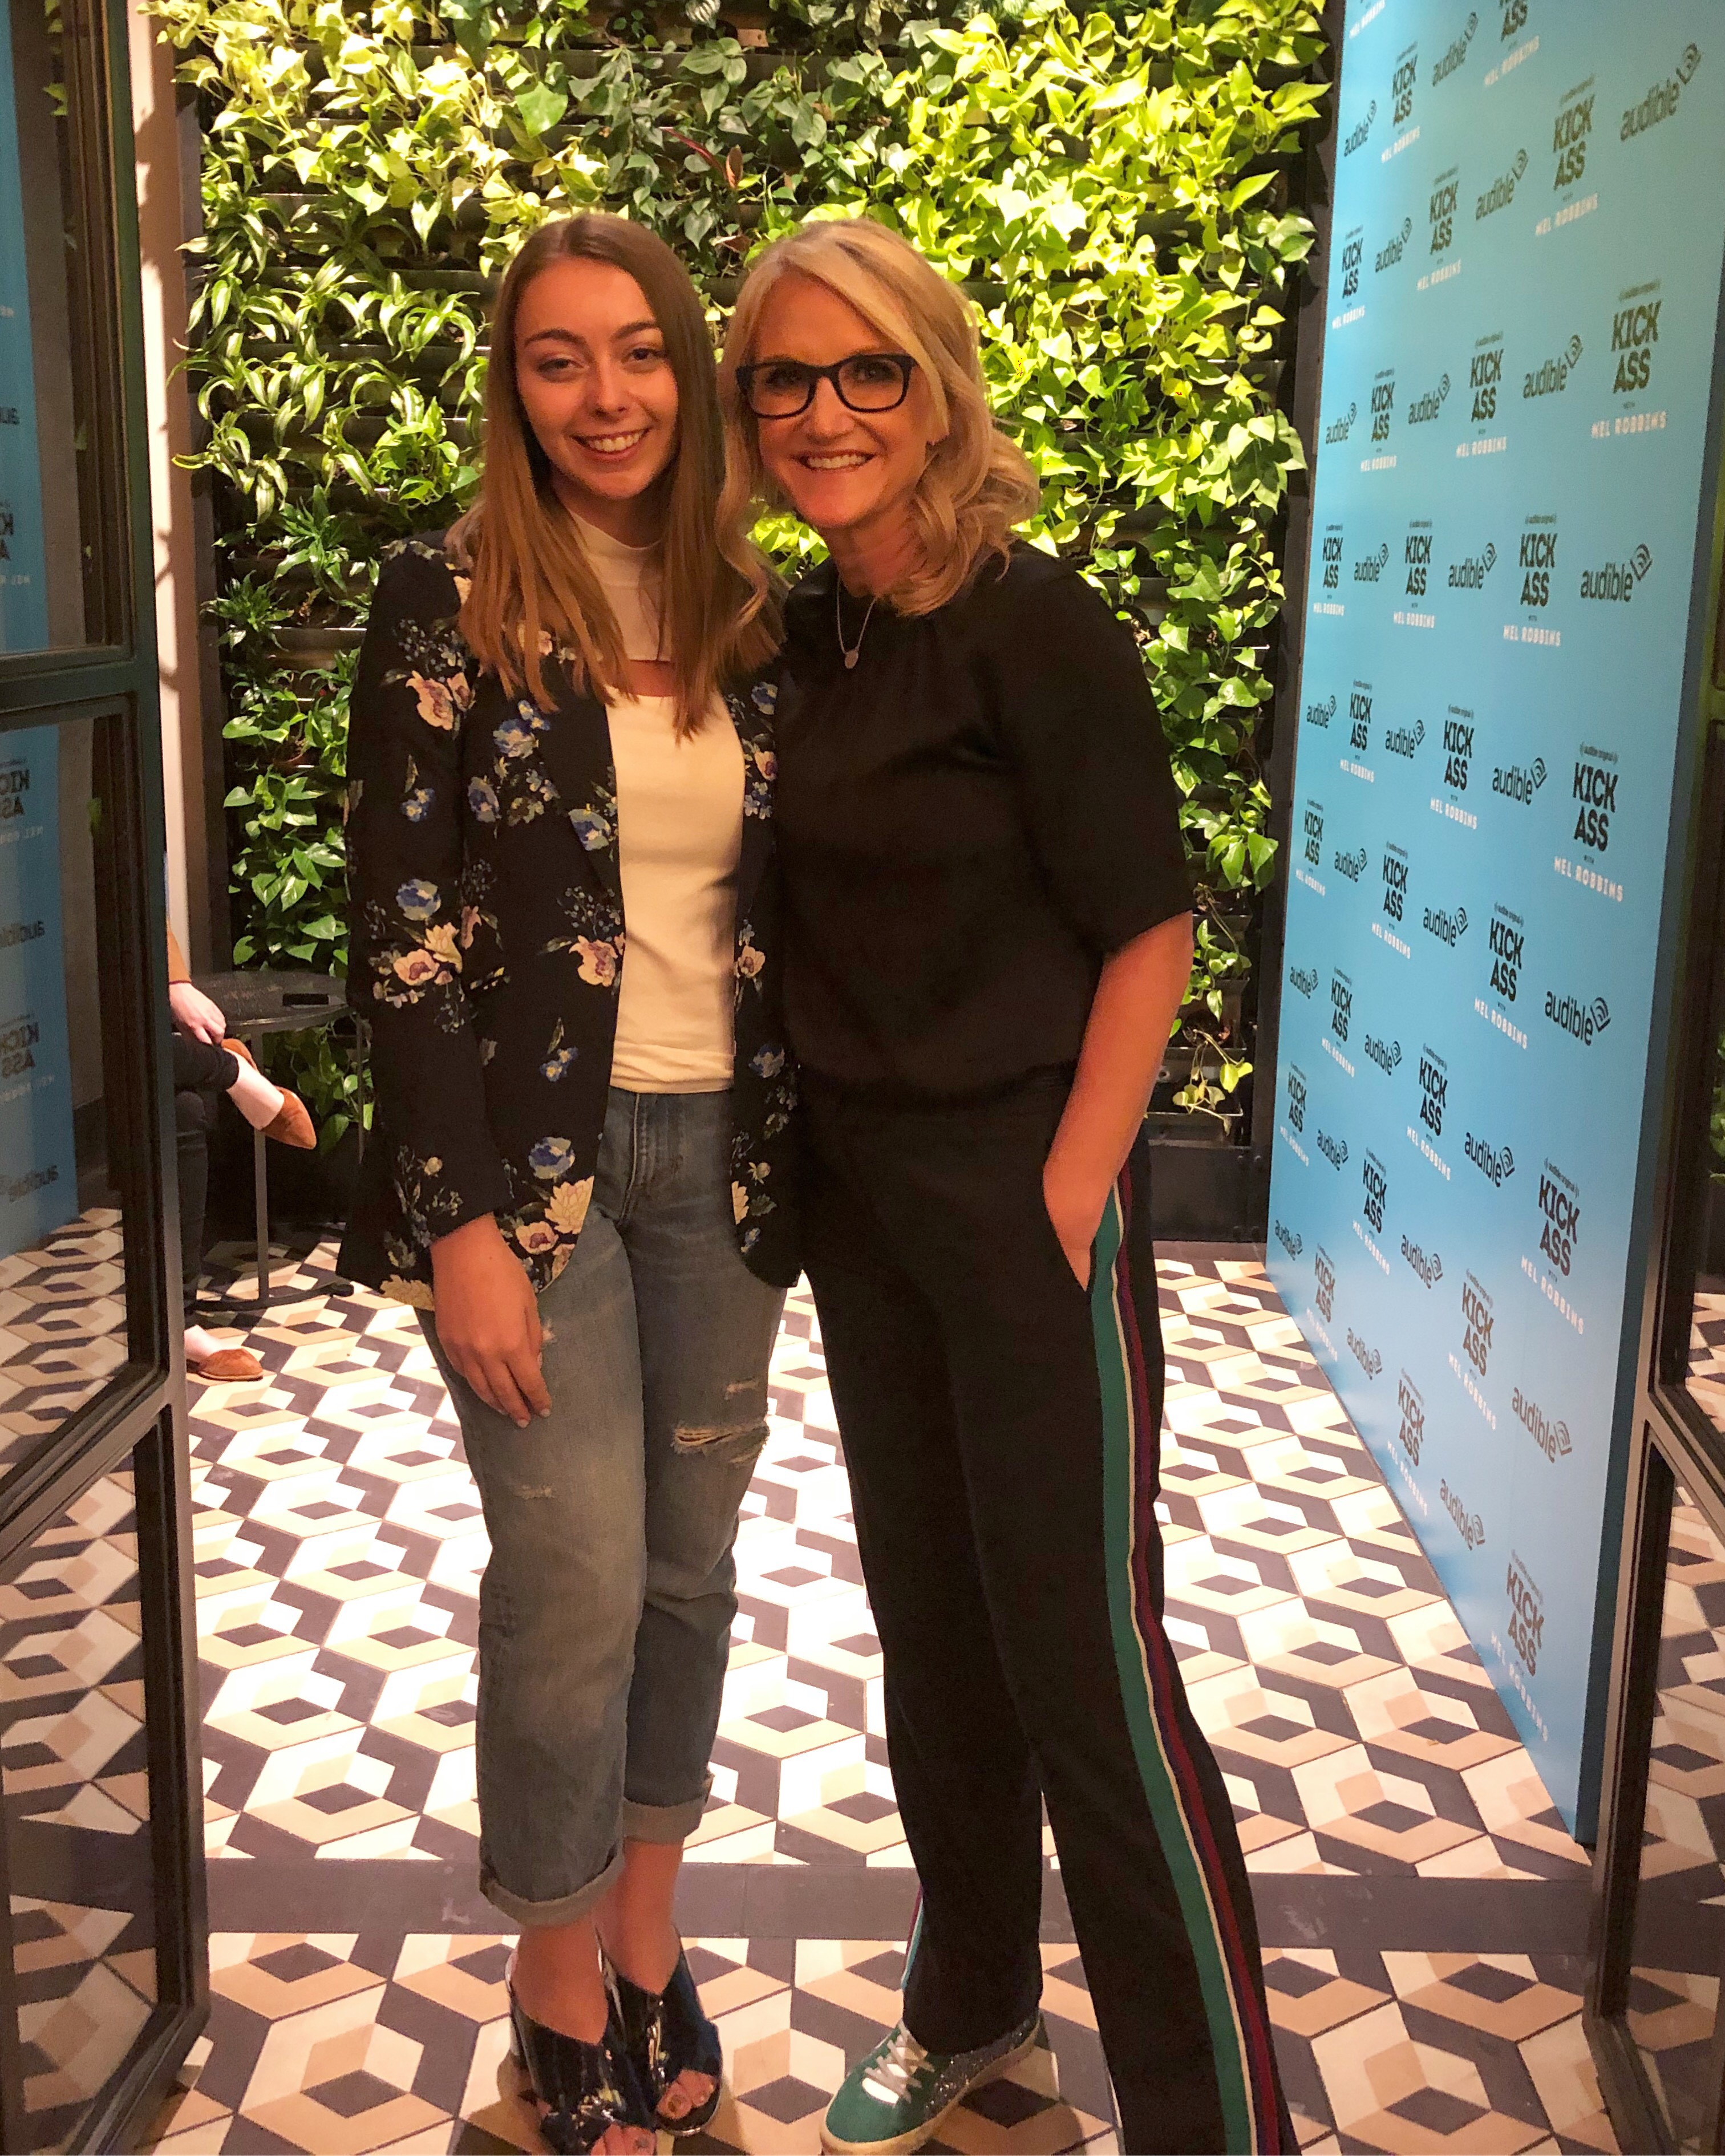 Audible Celebrates The Release Of Audible Original "Kick Ass With Mel Robbins" At Sixty Soho Hotel